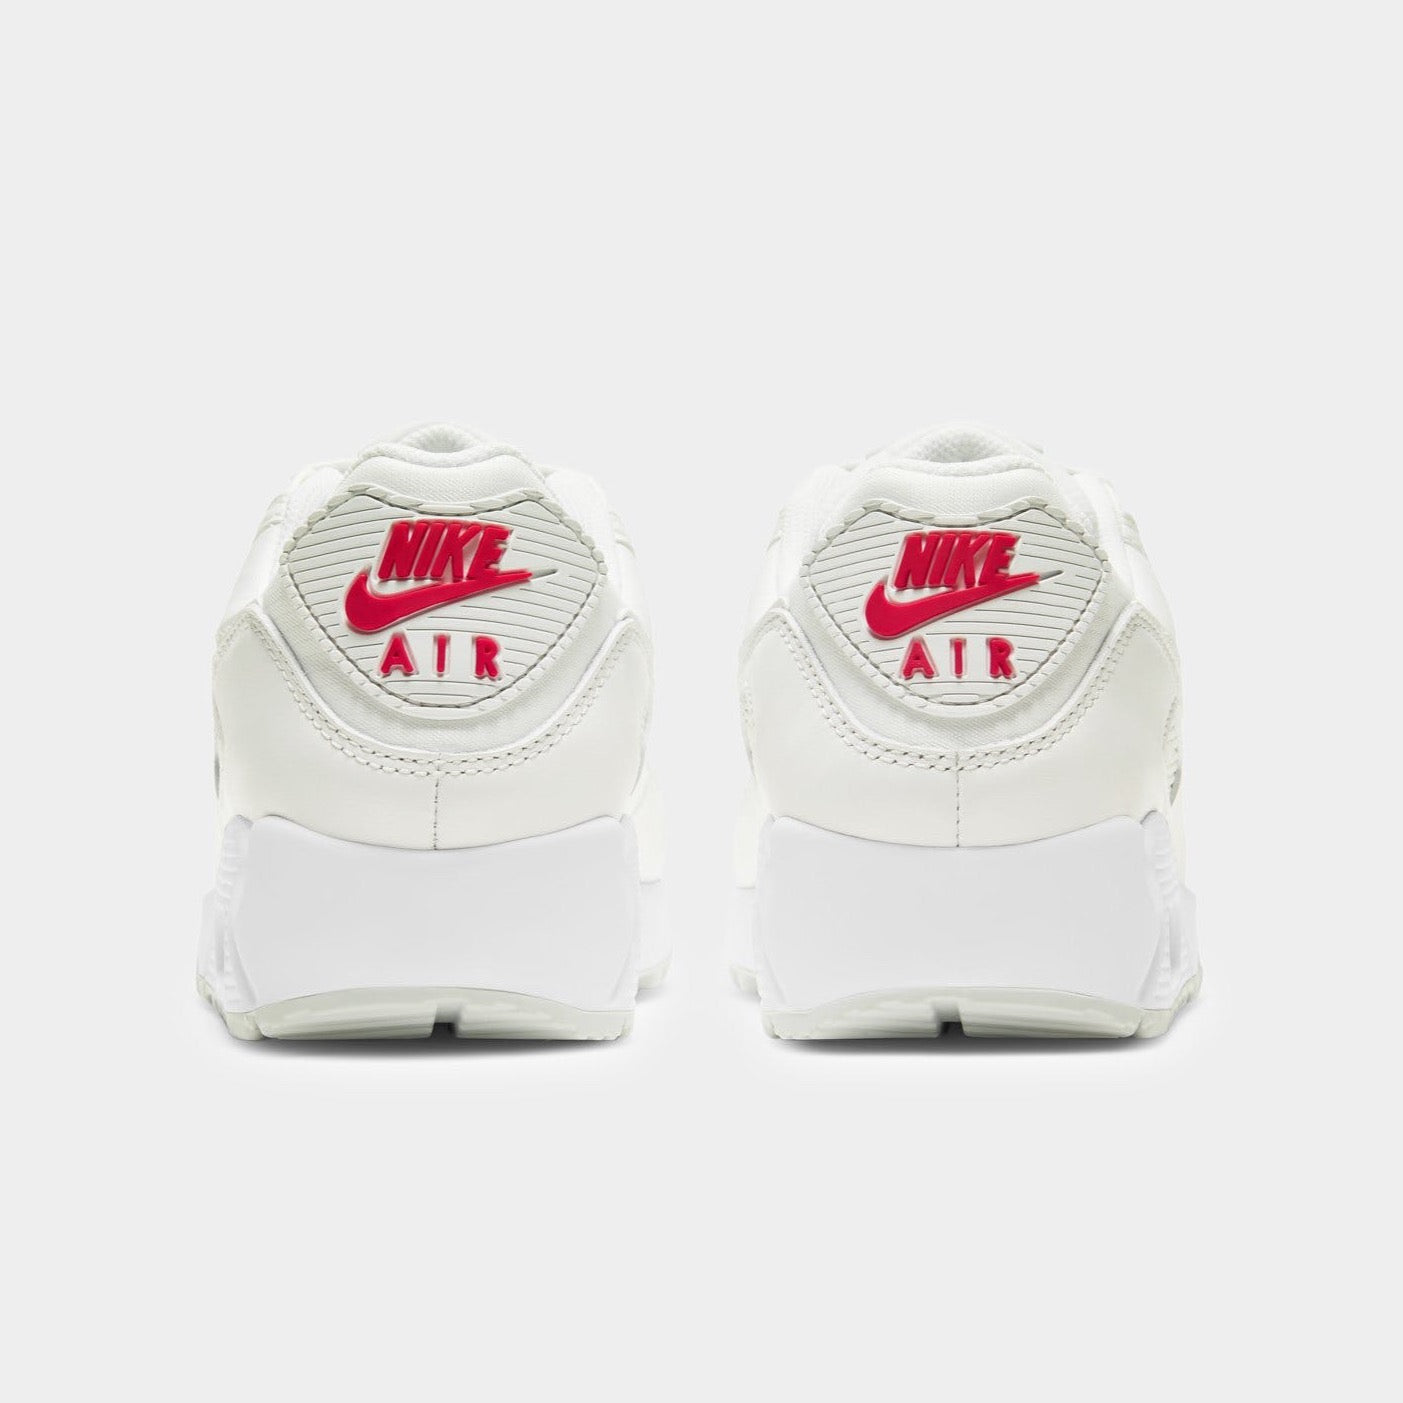 Warehouse SALE Air Max 90 Women (Off White/ Red)